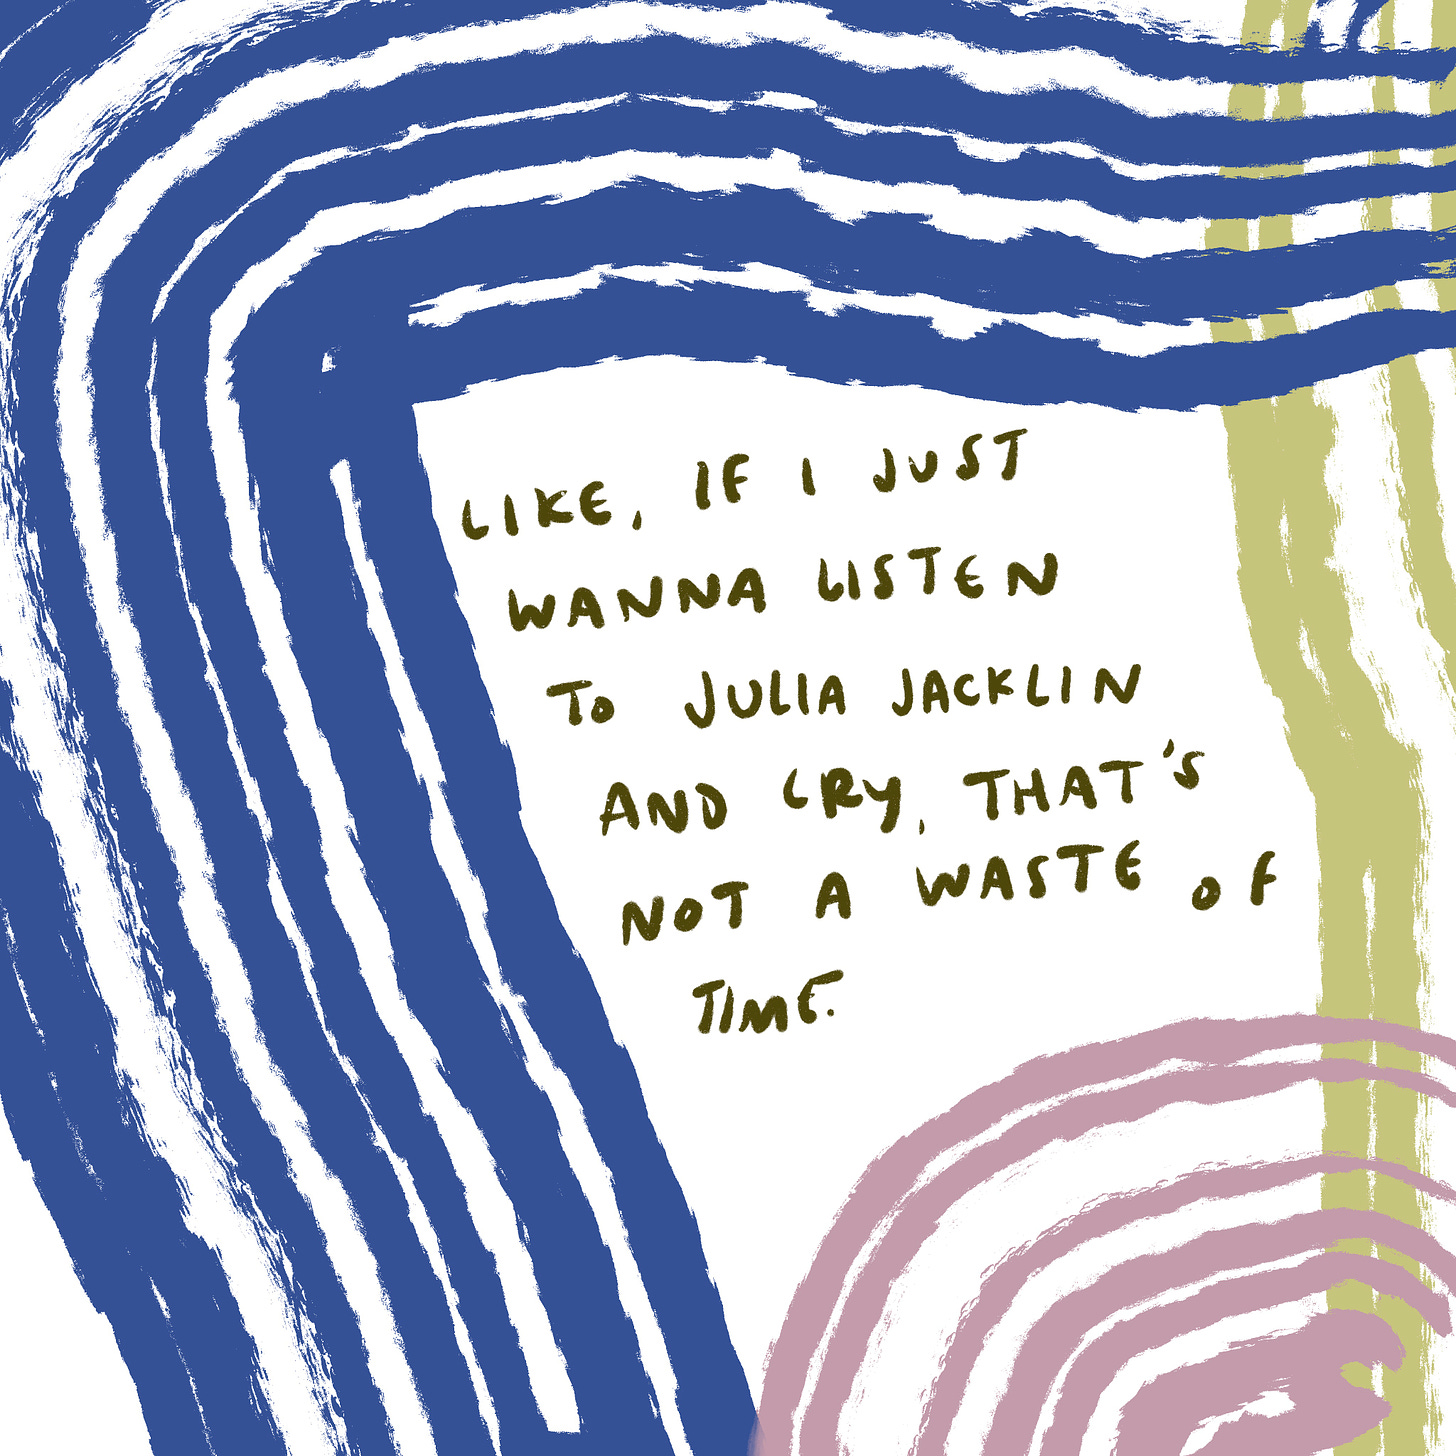 Like, if I just wanna listen to Julia Jacklin and cry, that's not a waste of time. 